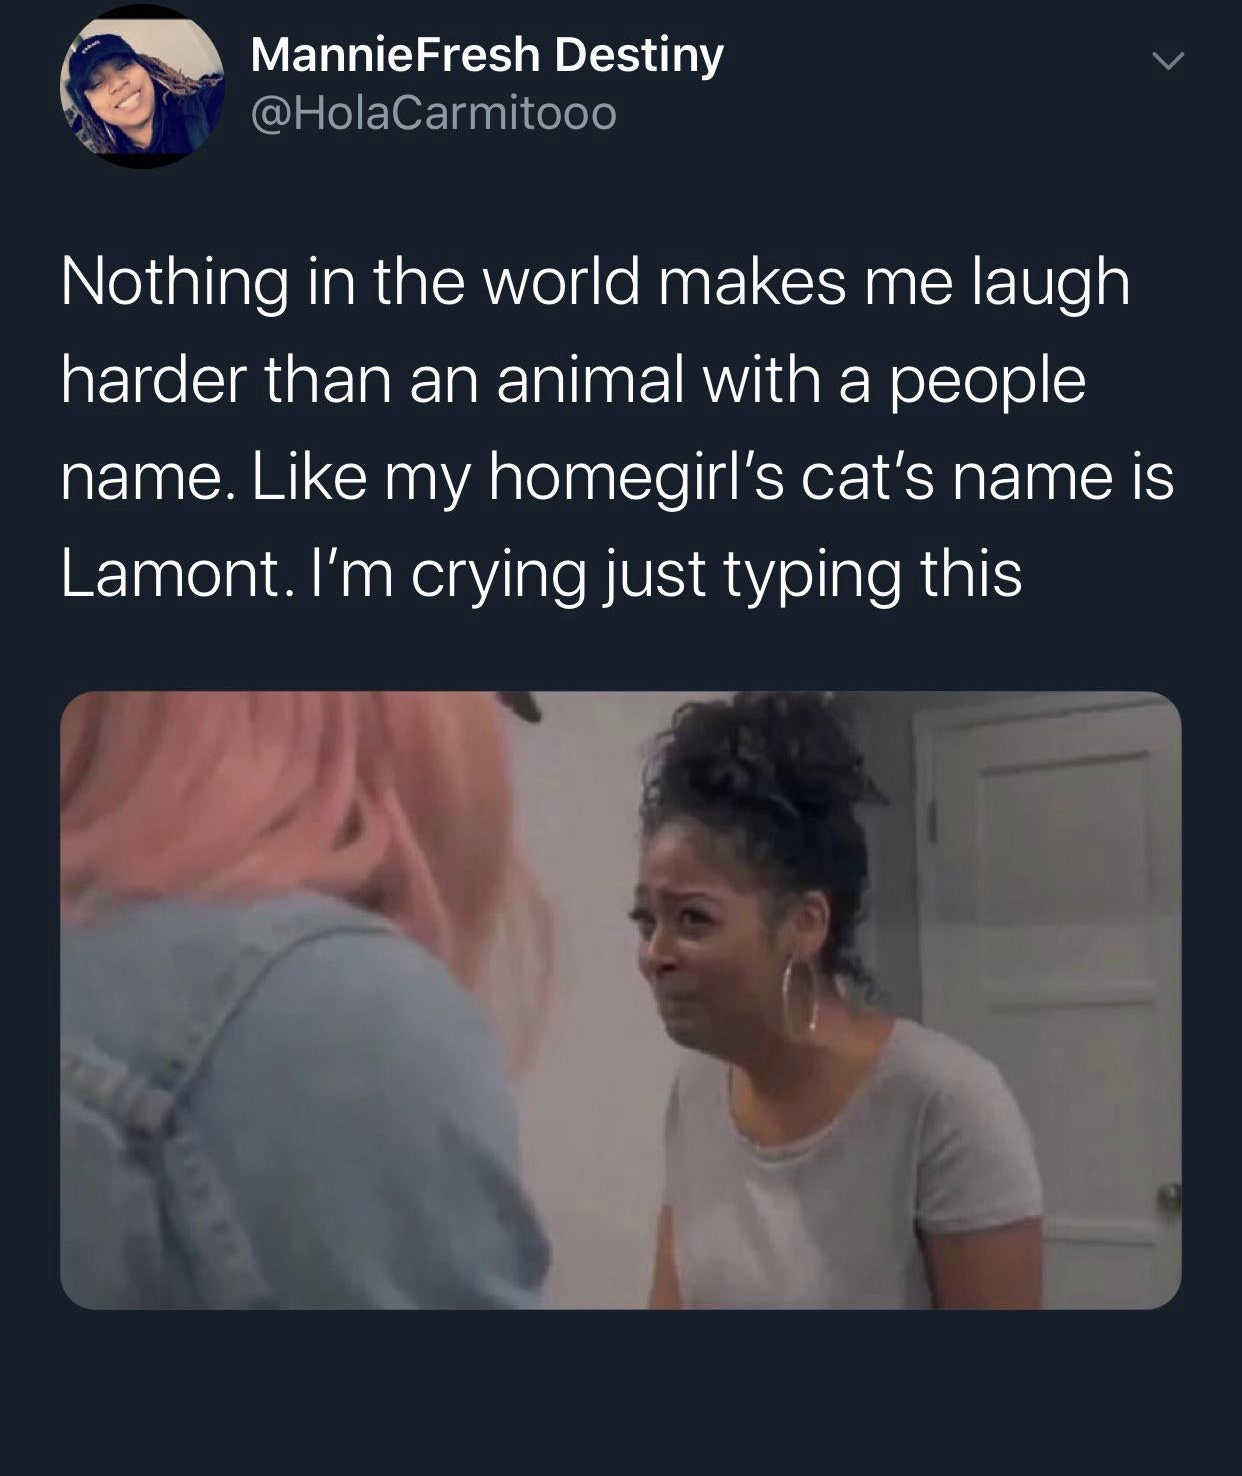 photo caption - Mannie Fresh Destiny Nothing in the world makes me laugh harder than an animal with a people name. my homegirl's cat's name is Lamont. I'm crying just typing this